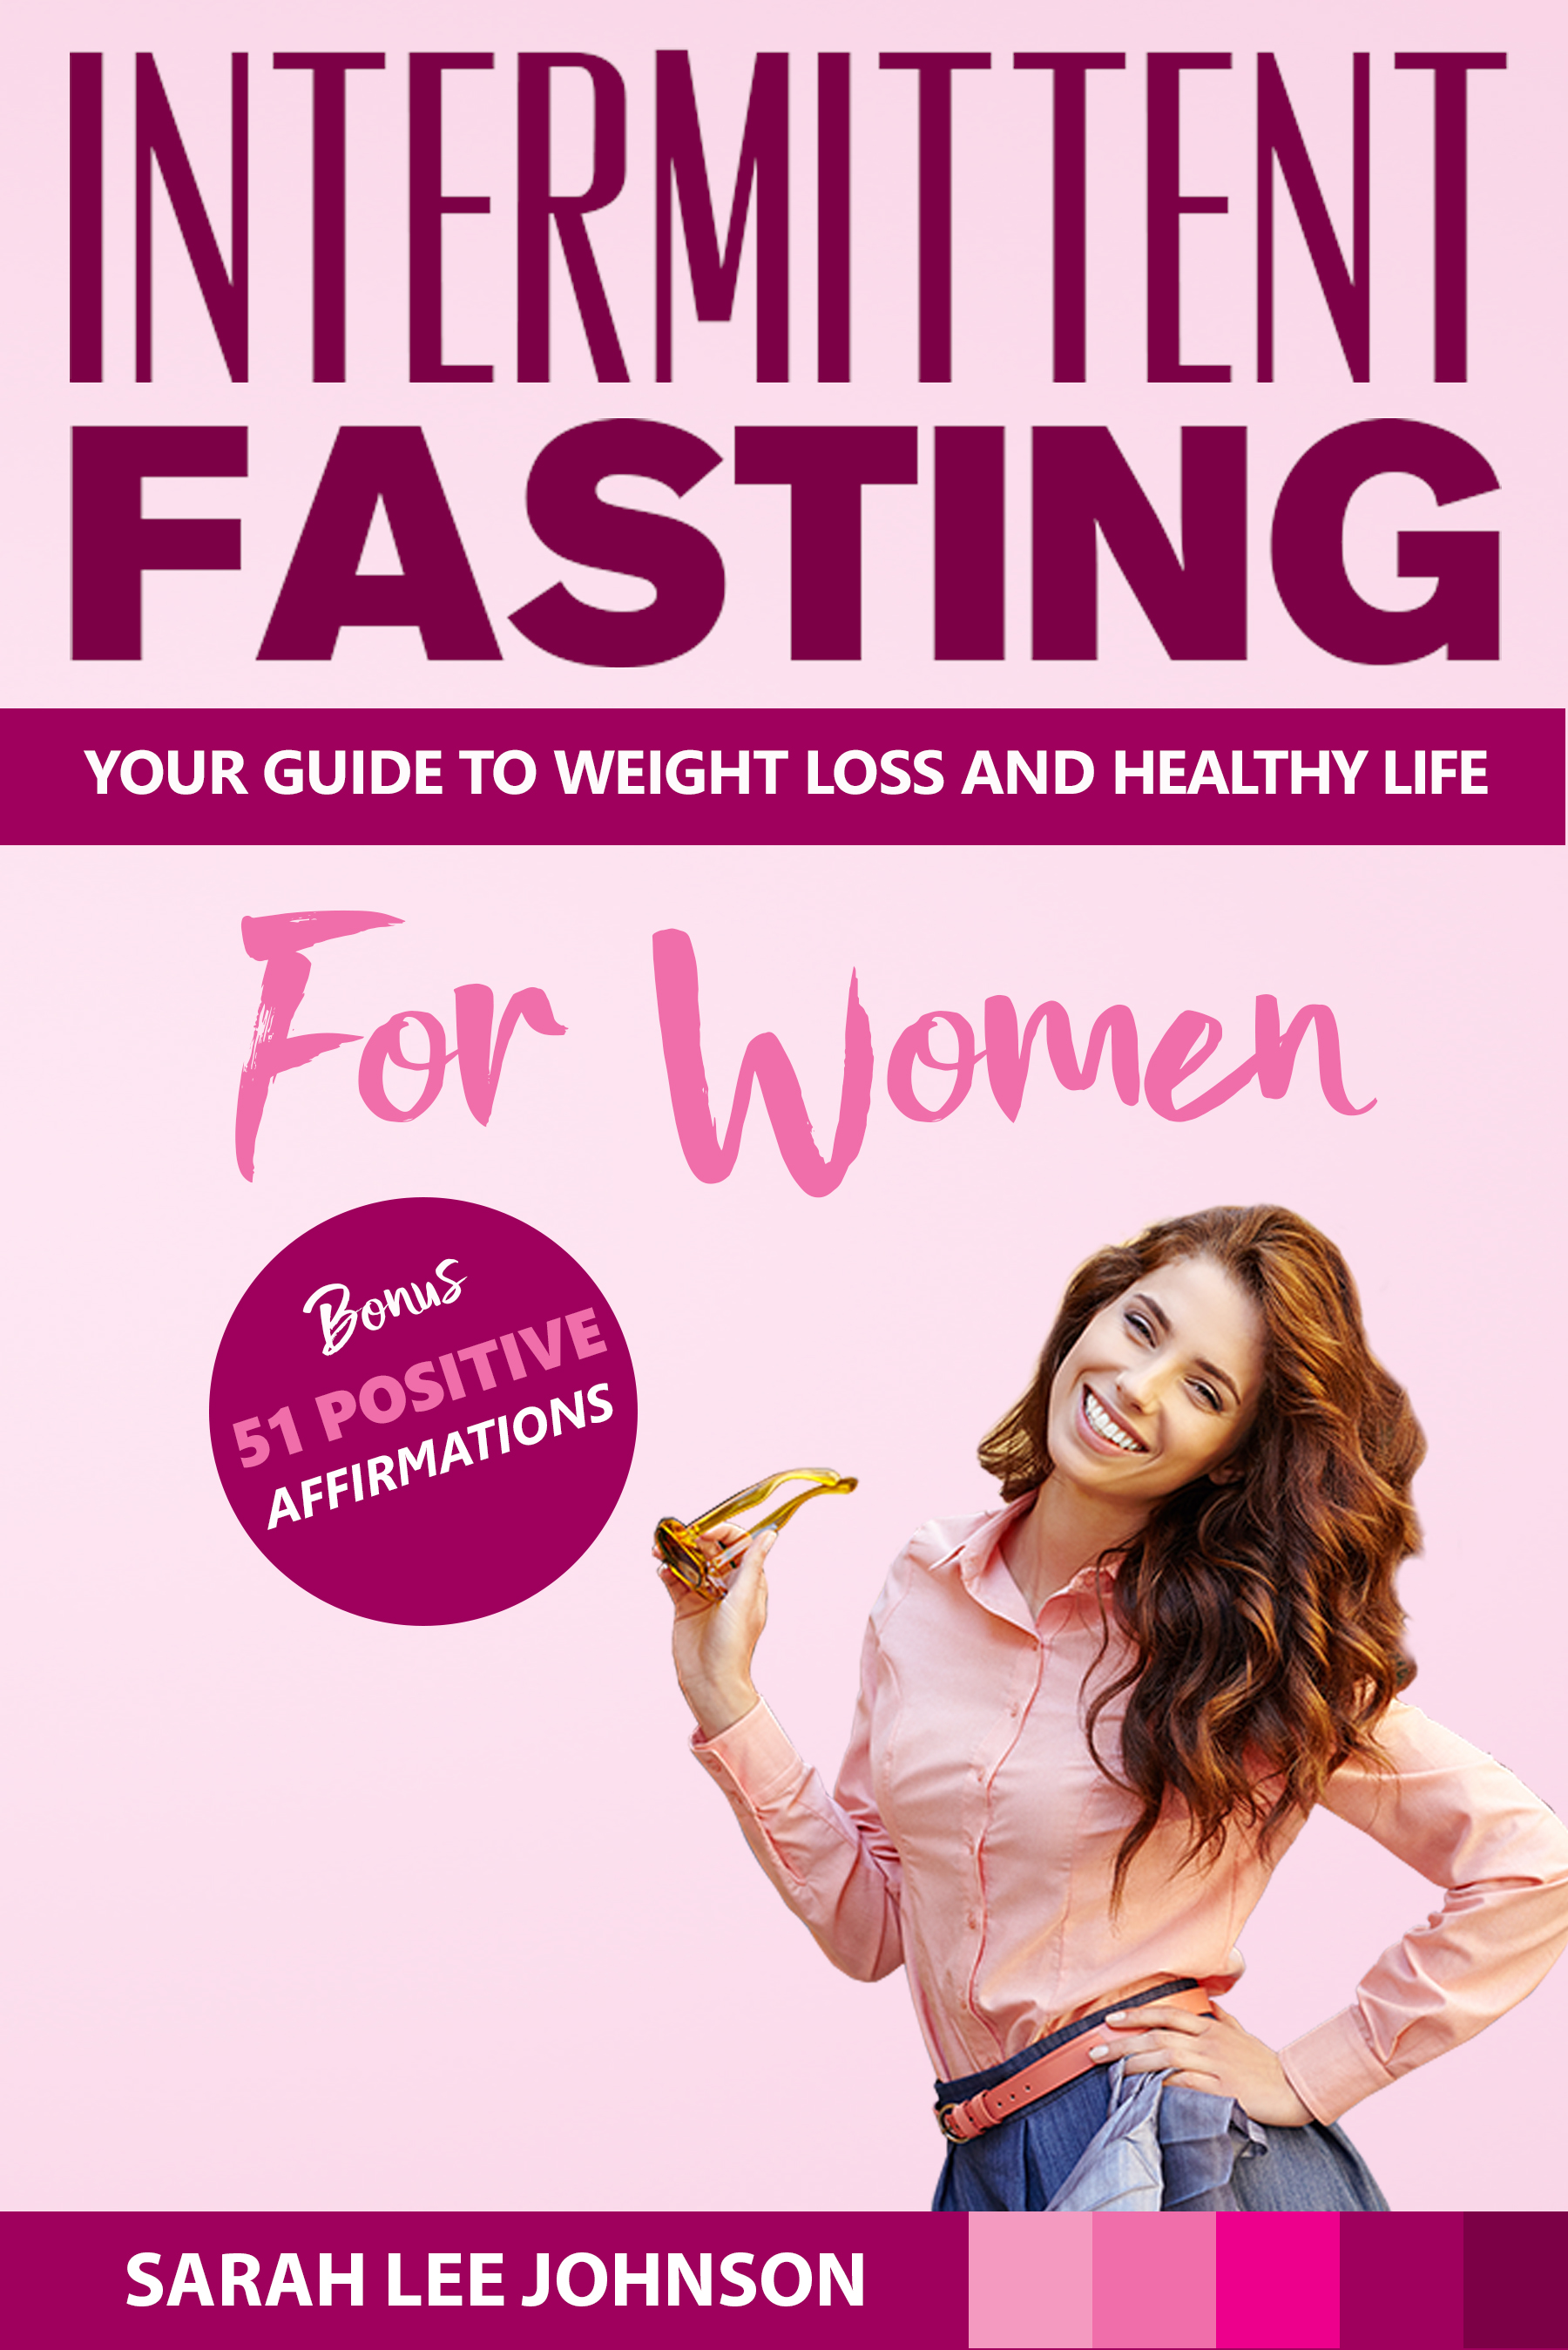 FREE: Intermittent Fasting by Sarah Lee Johnson